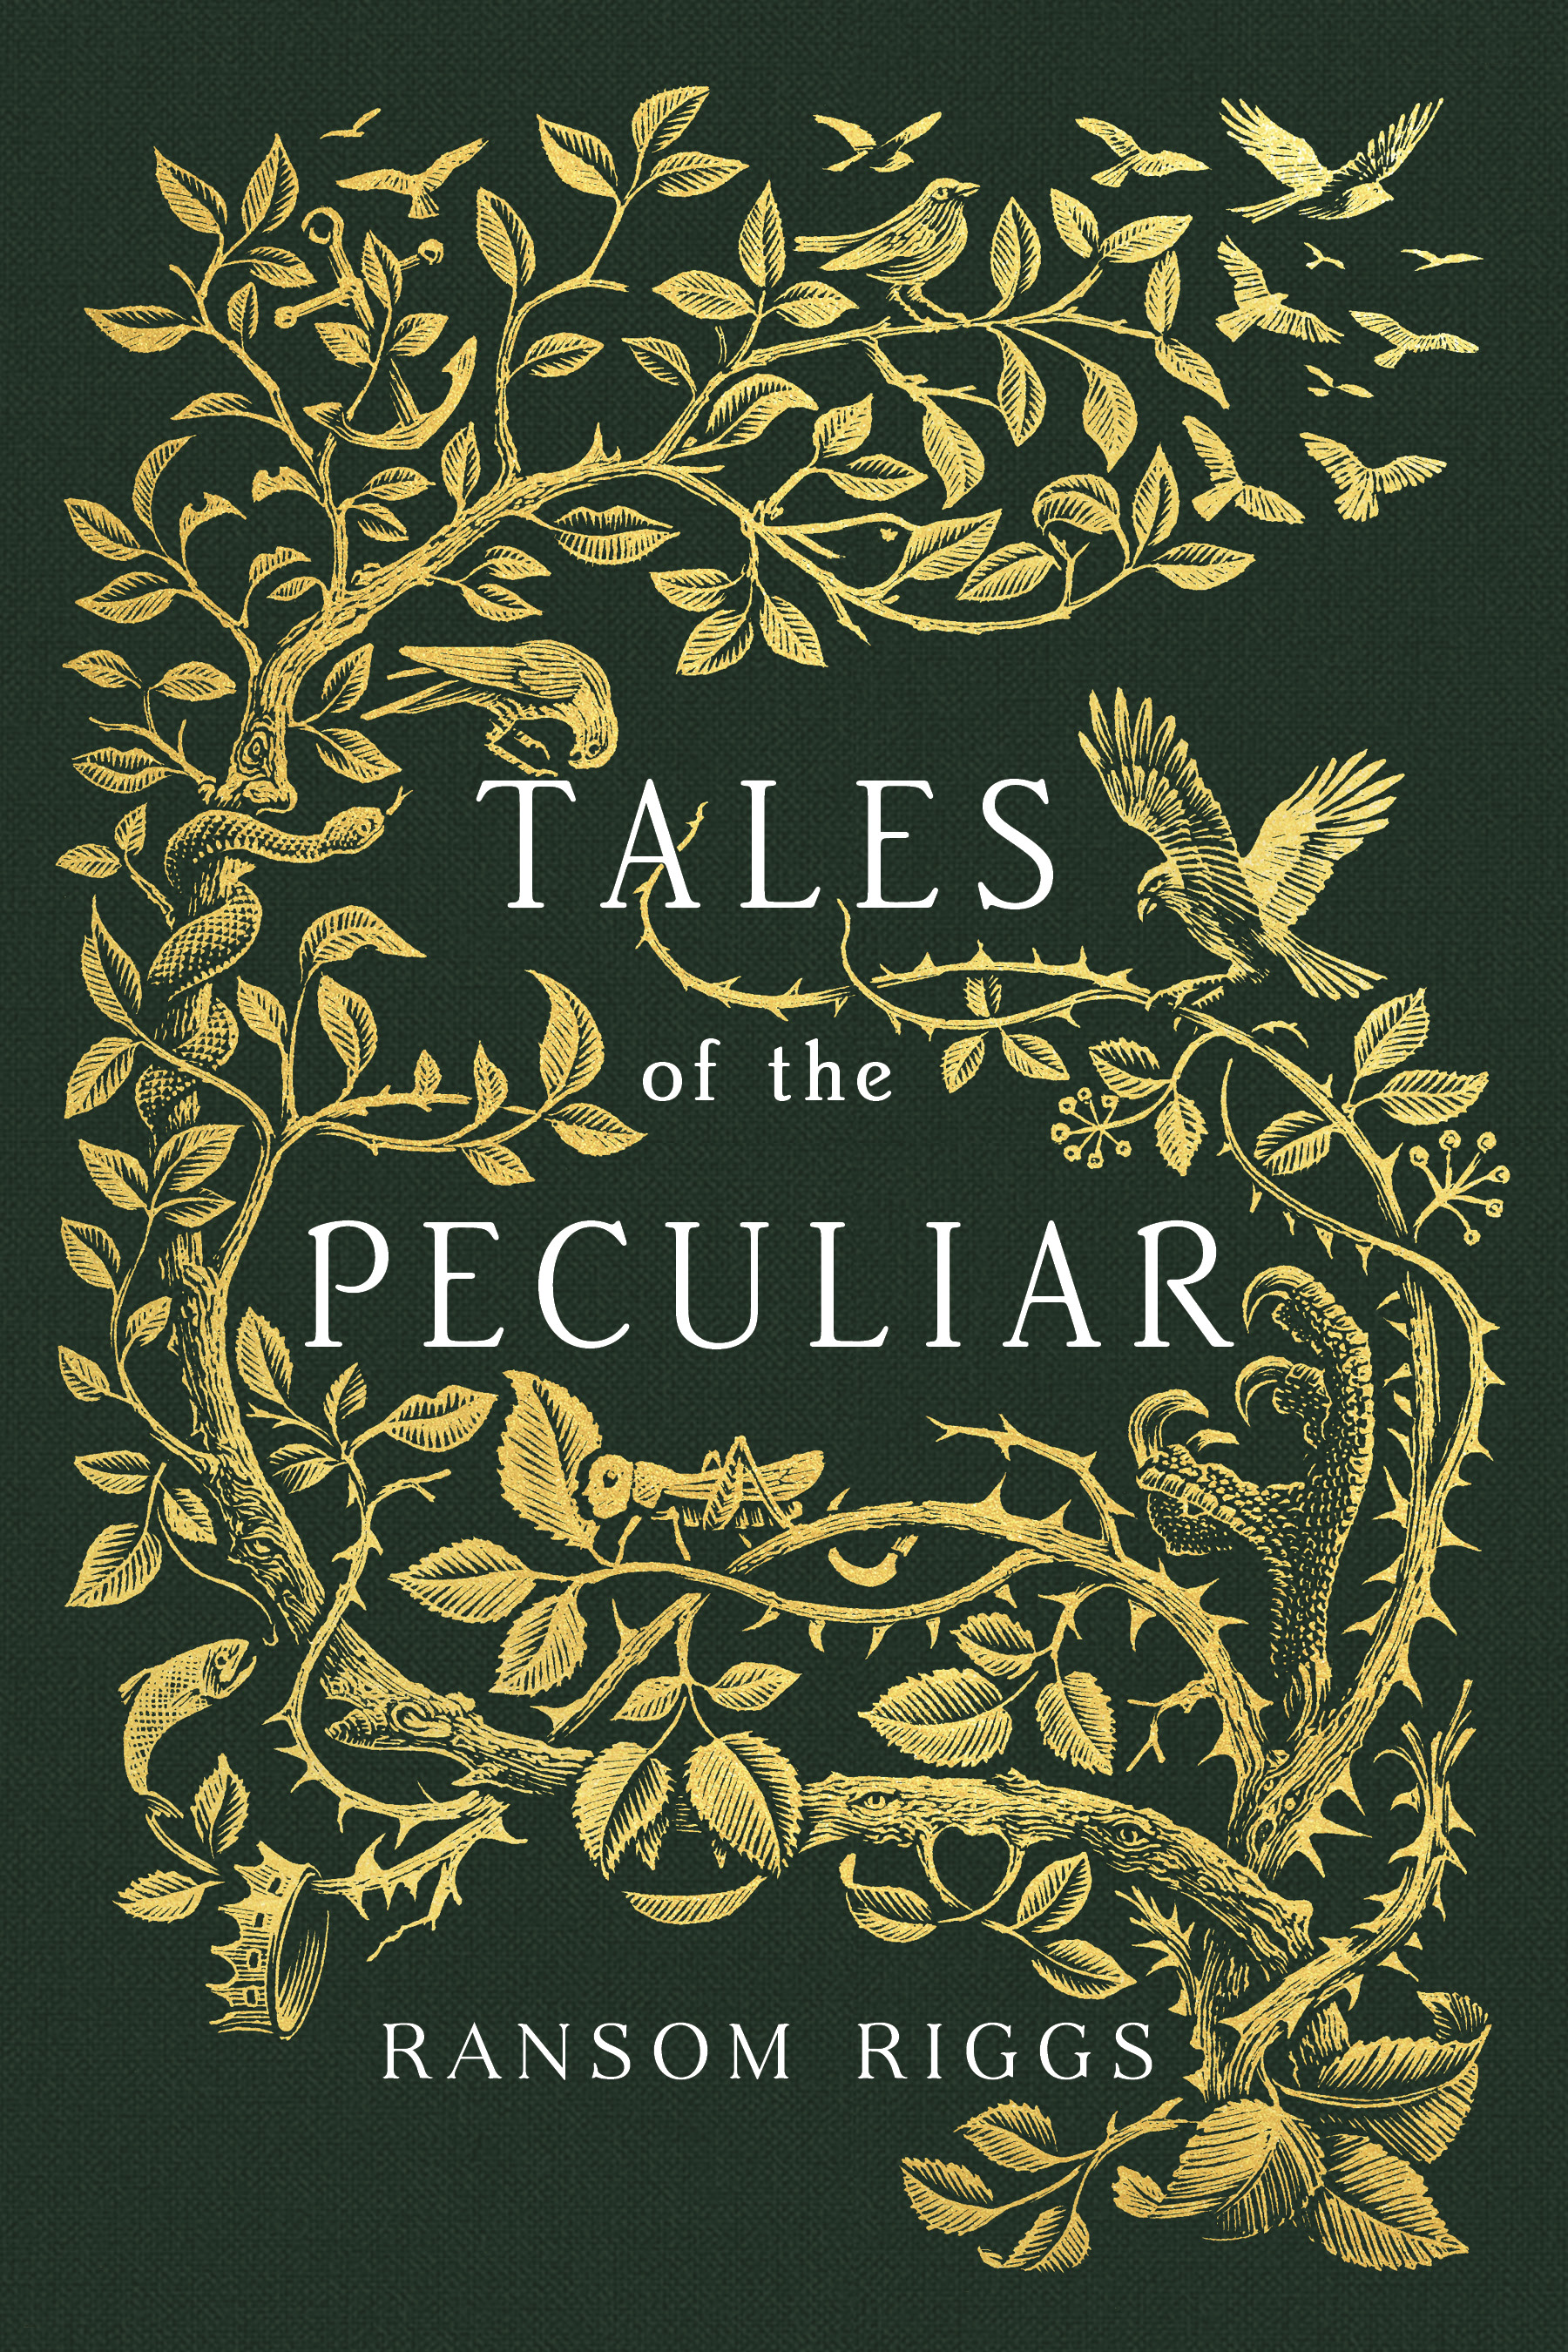 Image result for tales of the peculiar